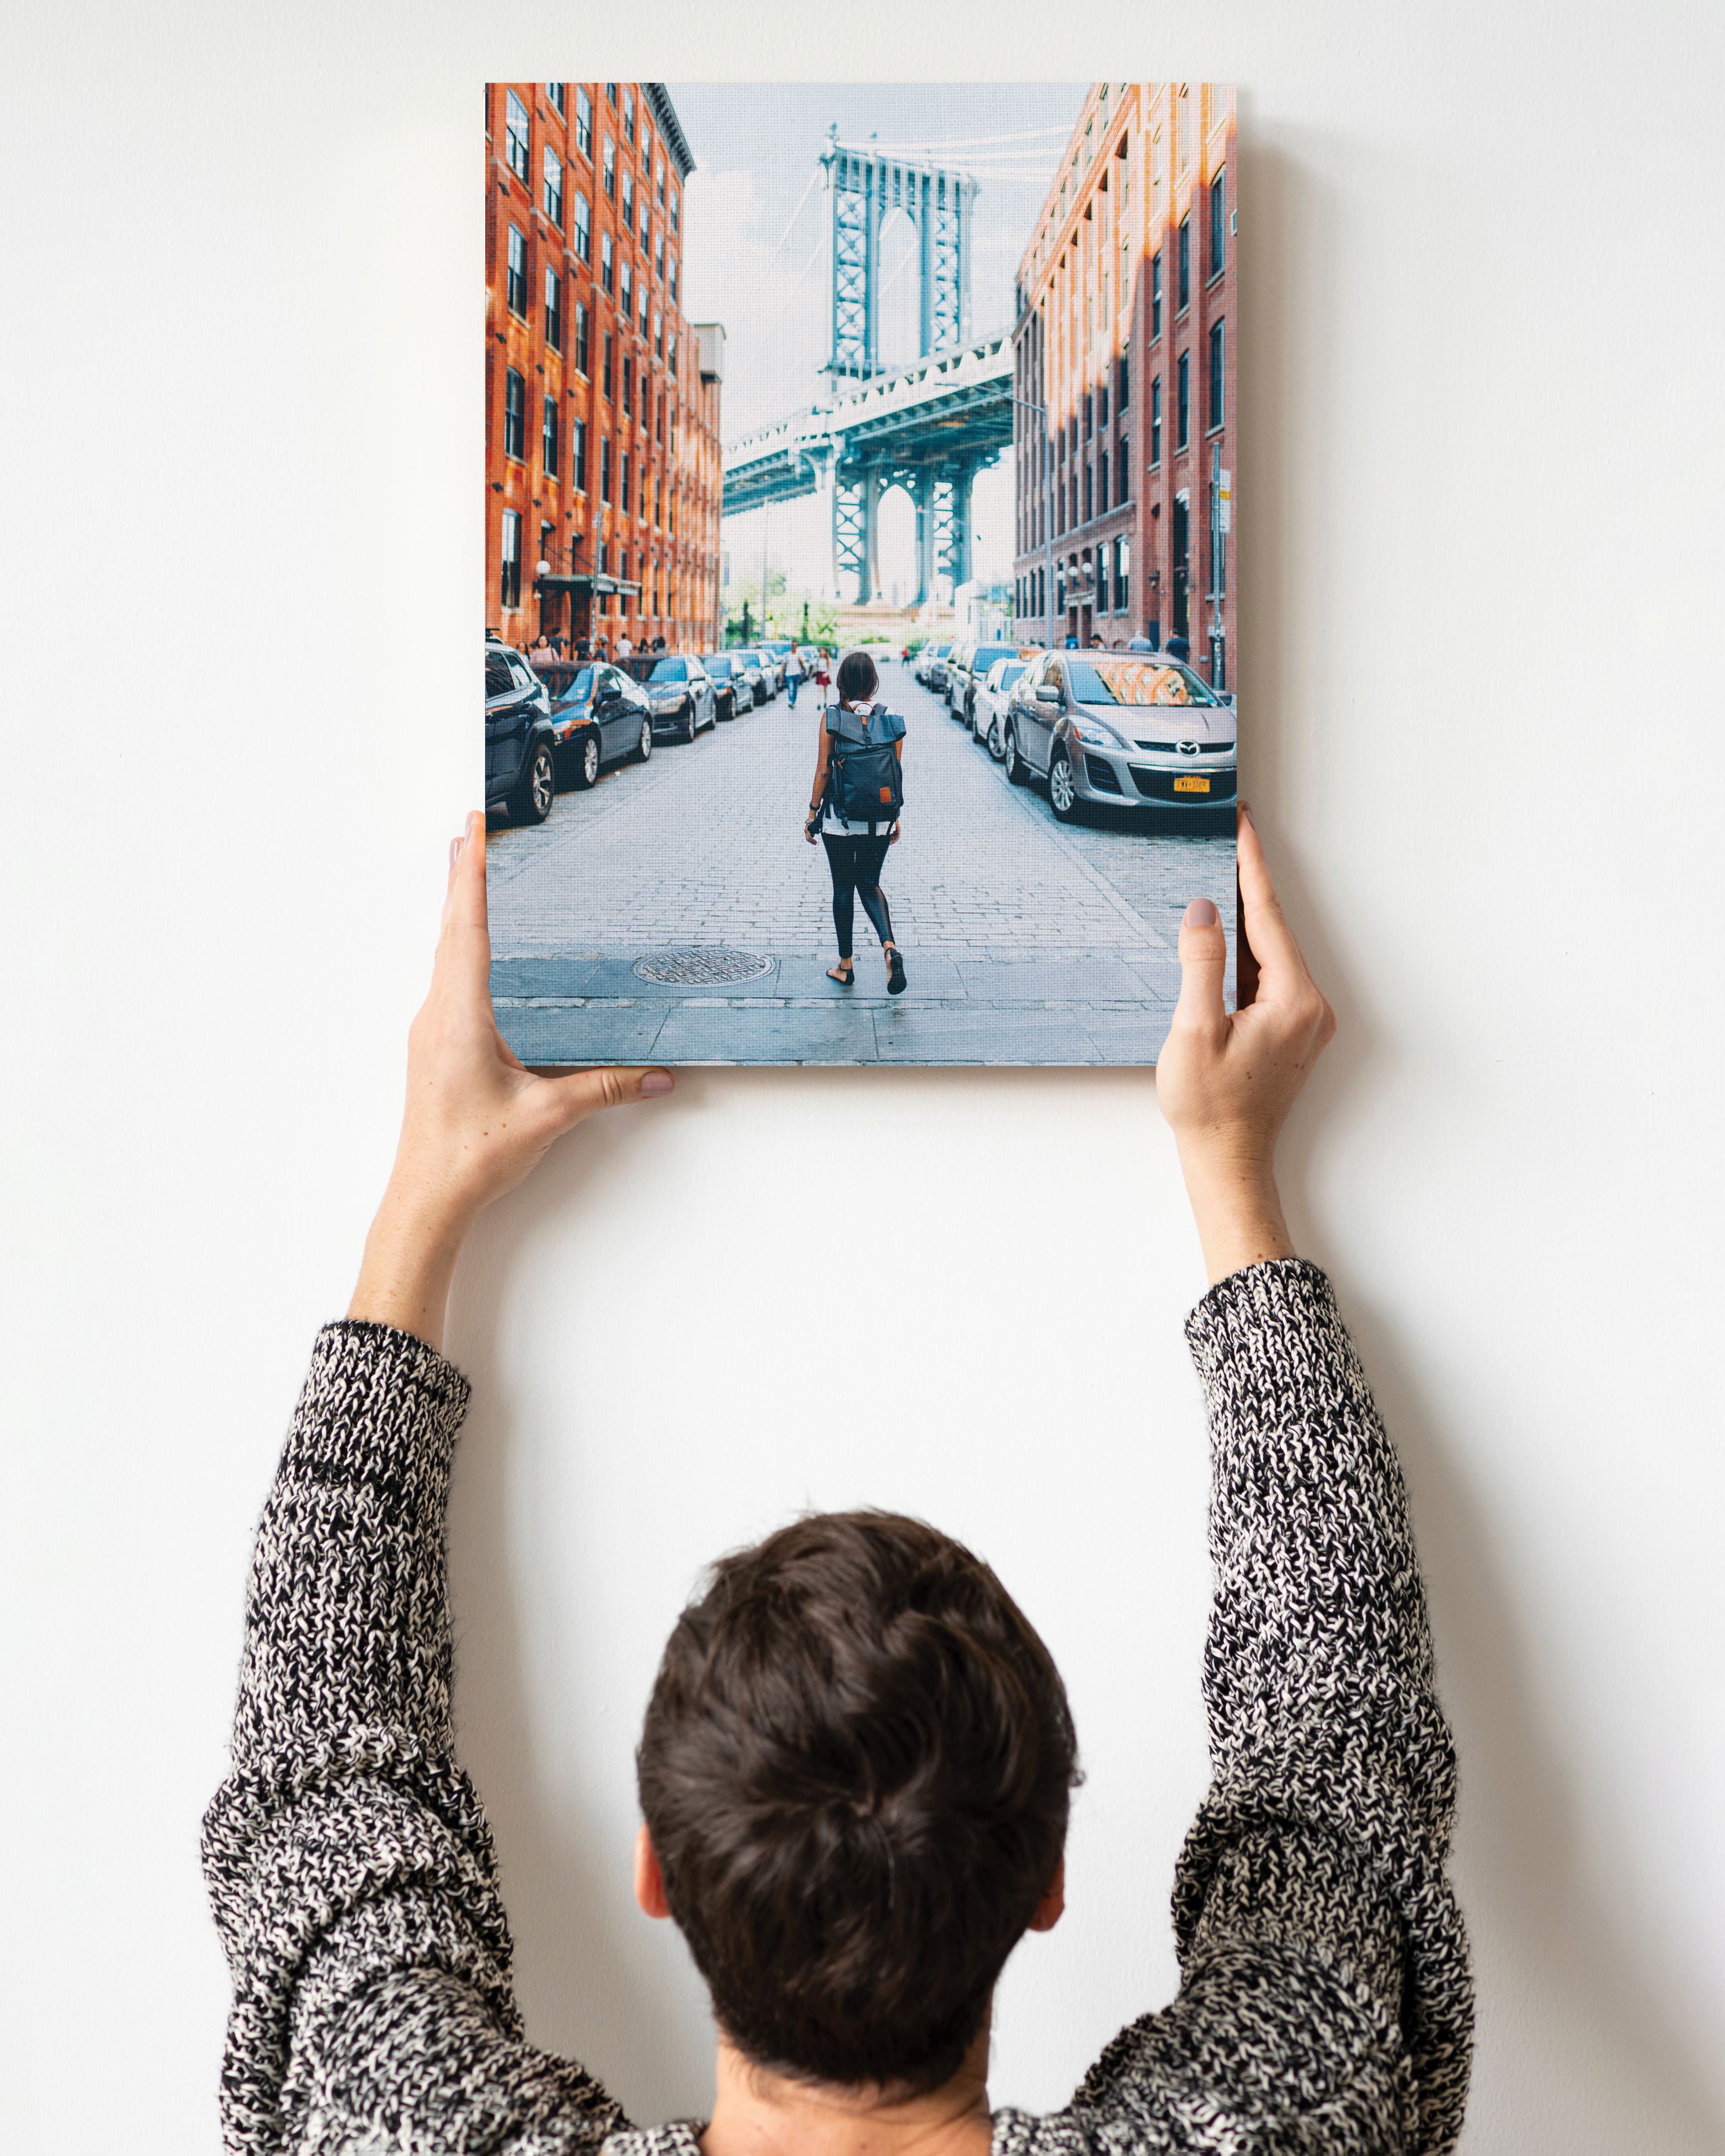 Photo of a person hanging canvas print on wall